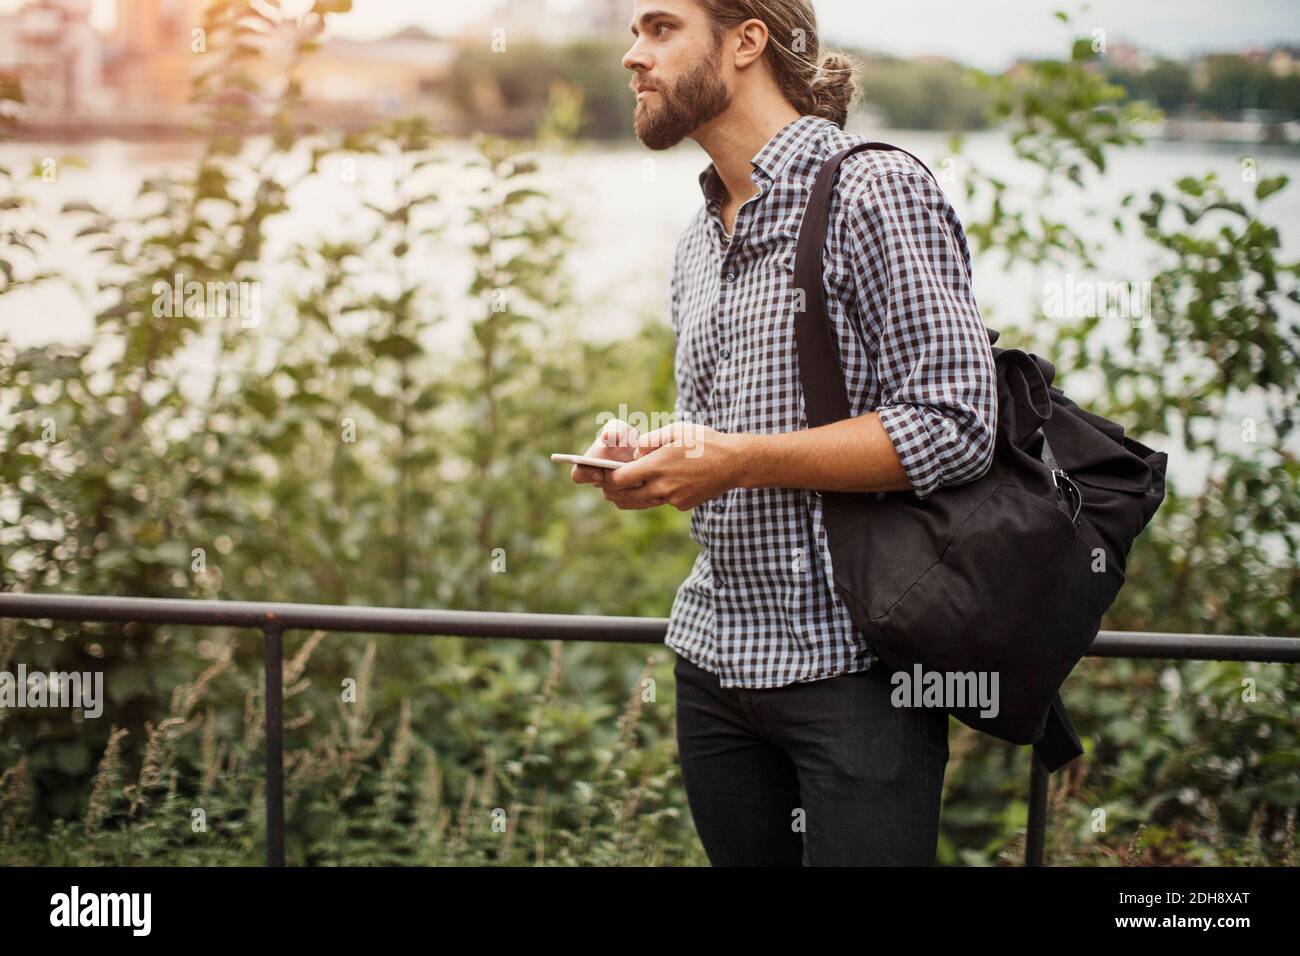 Man holding smart phone while standing by railing and plants Stock Photo